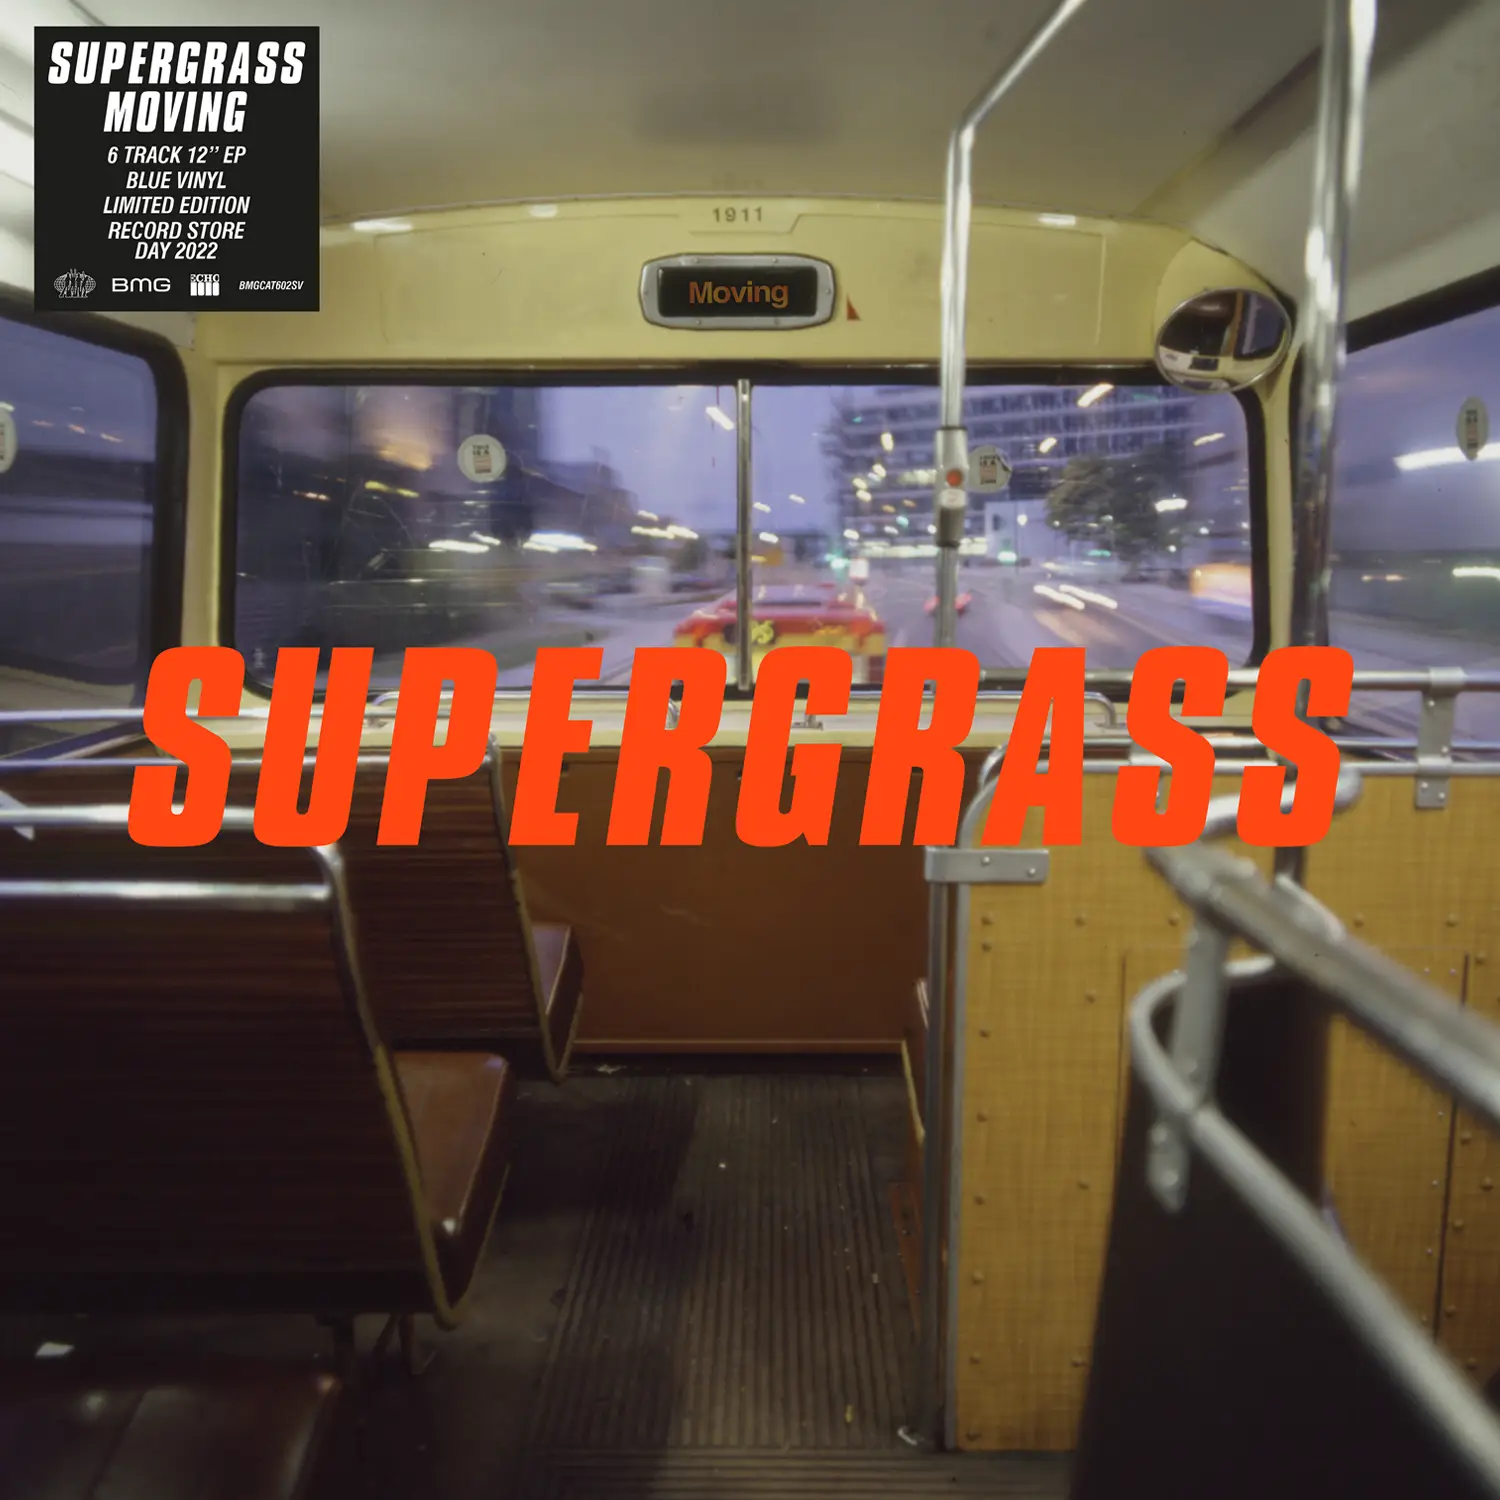 <strong>Supergrass - Moving</strong> (Vinyl 12 - blue)